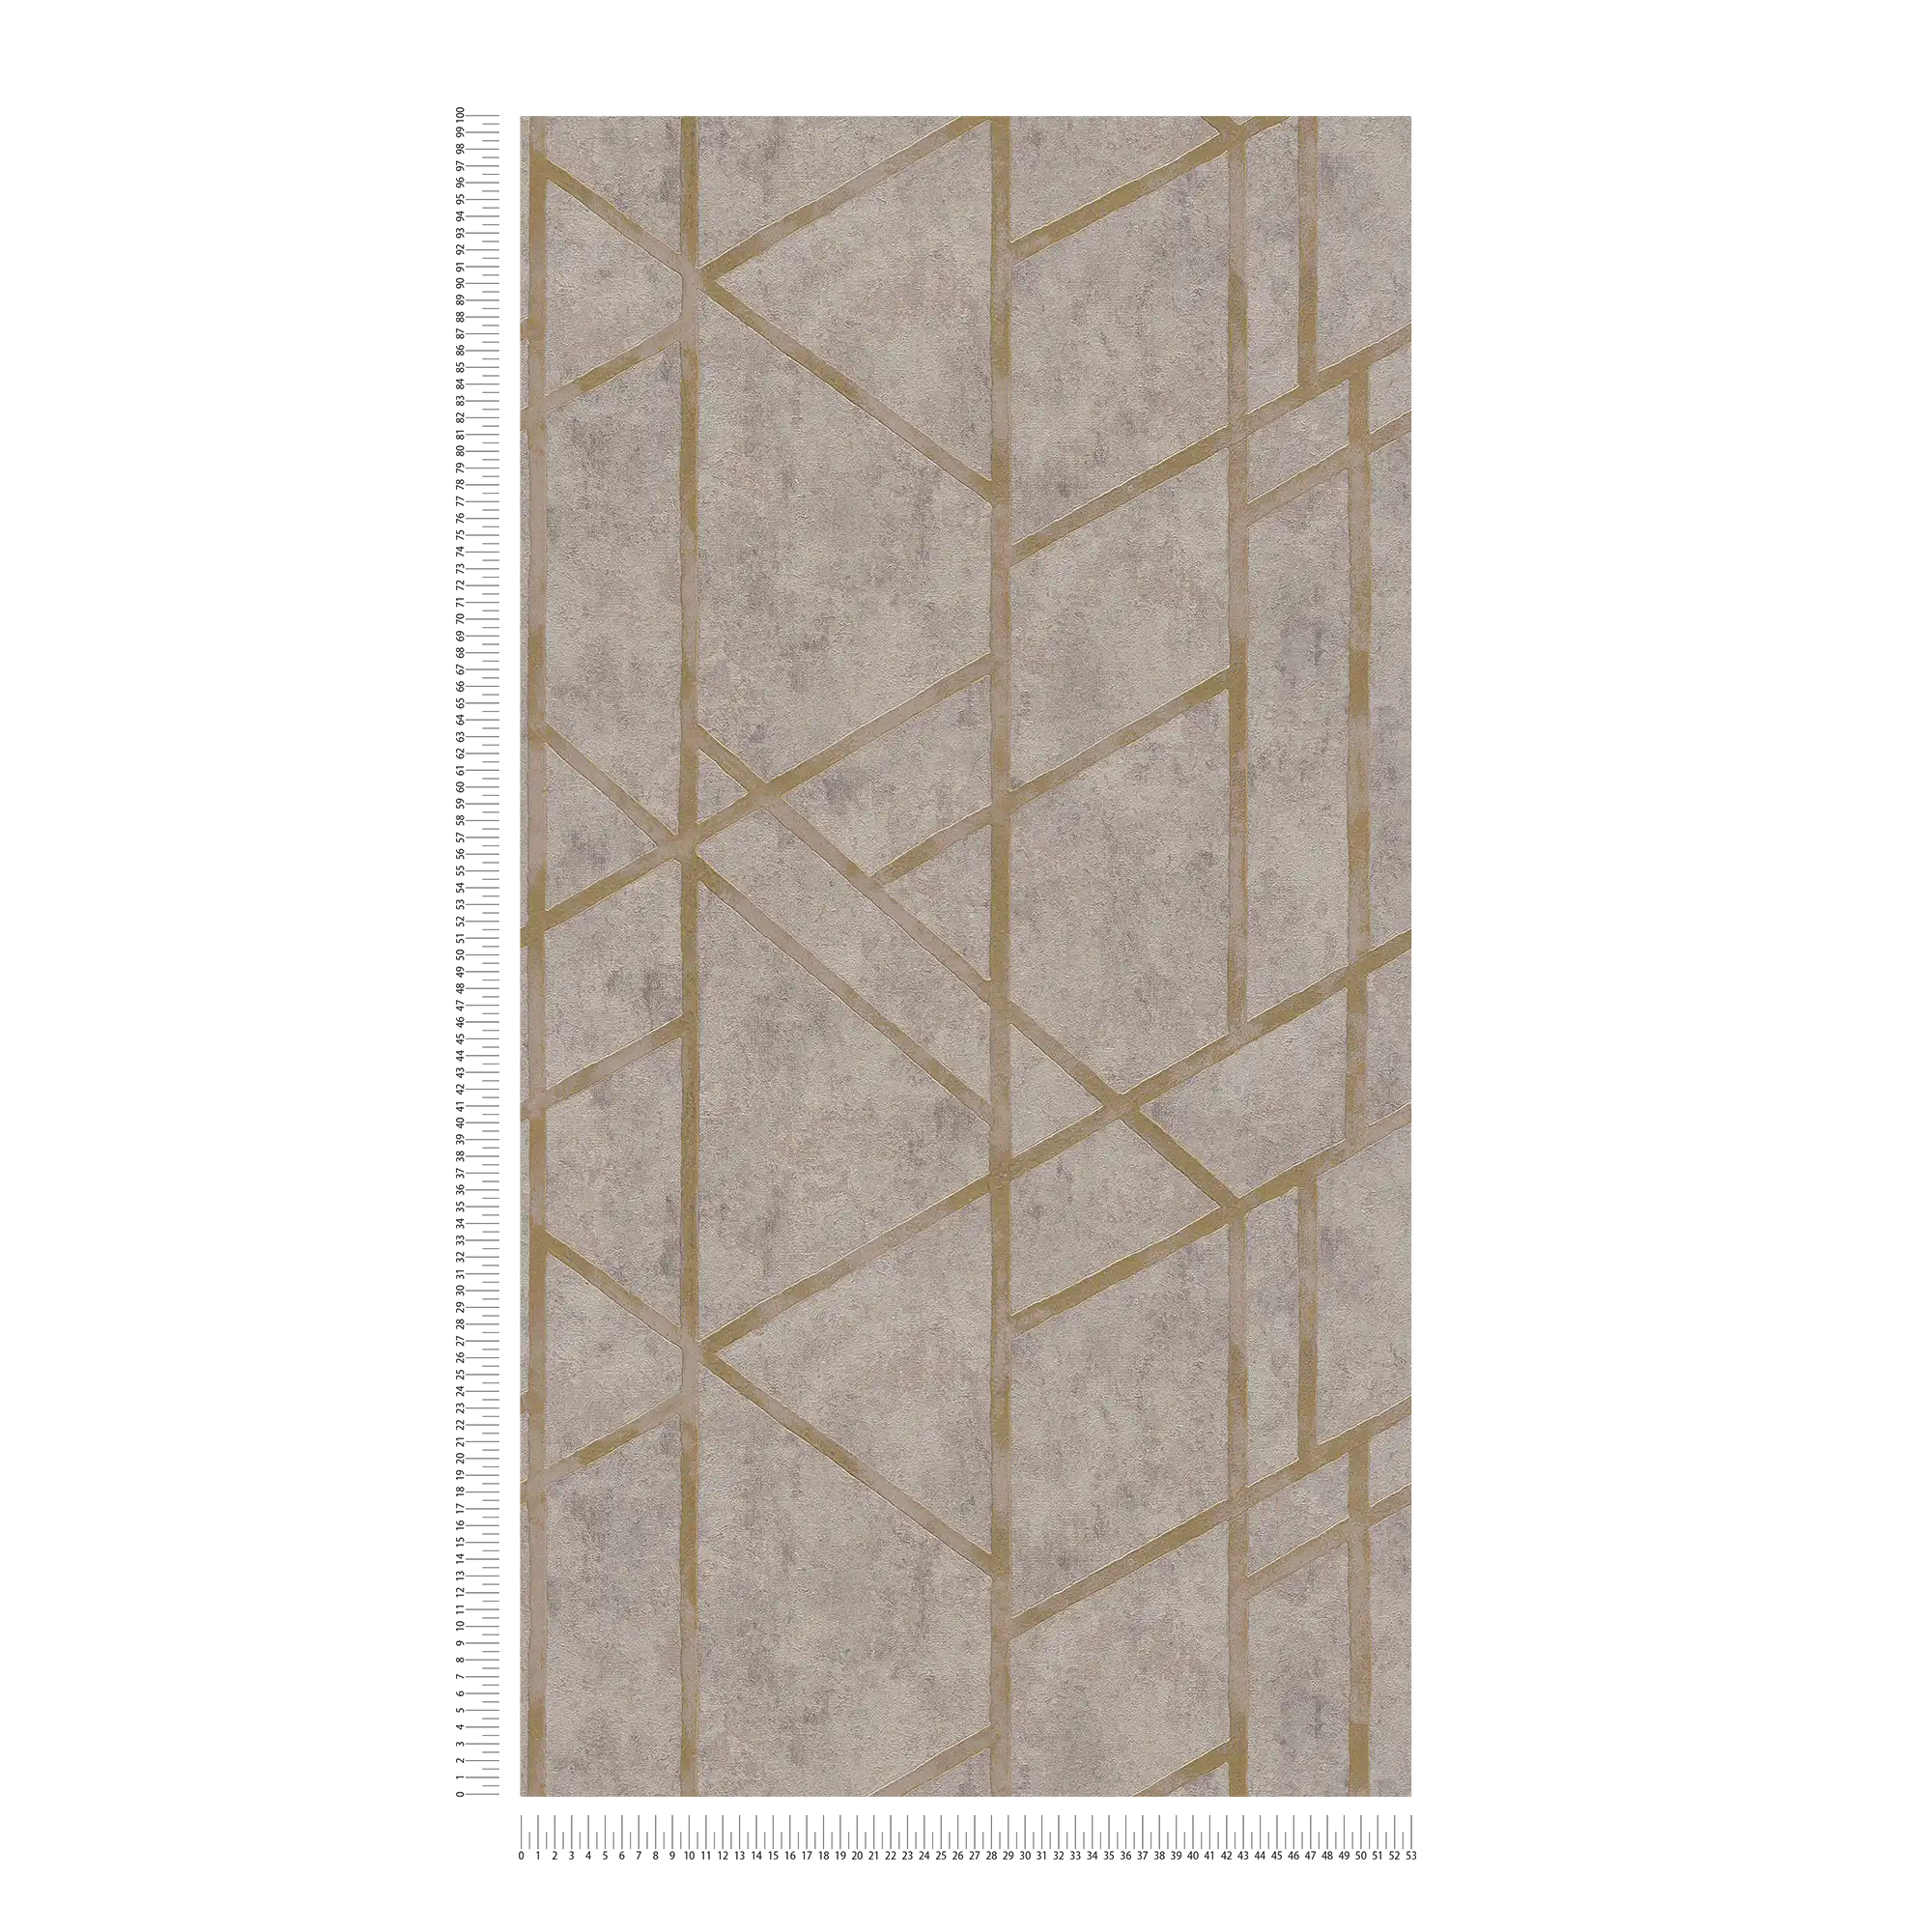             Concrete wallpaper with golden lines pattern - gold, beige, grey
        